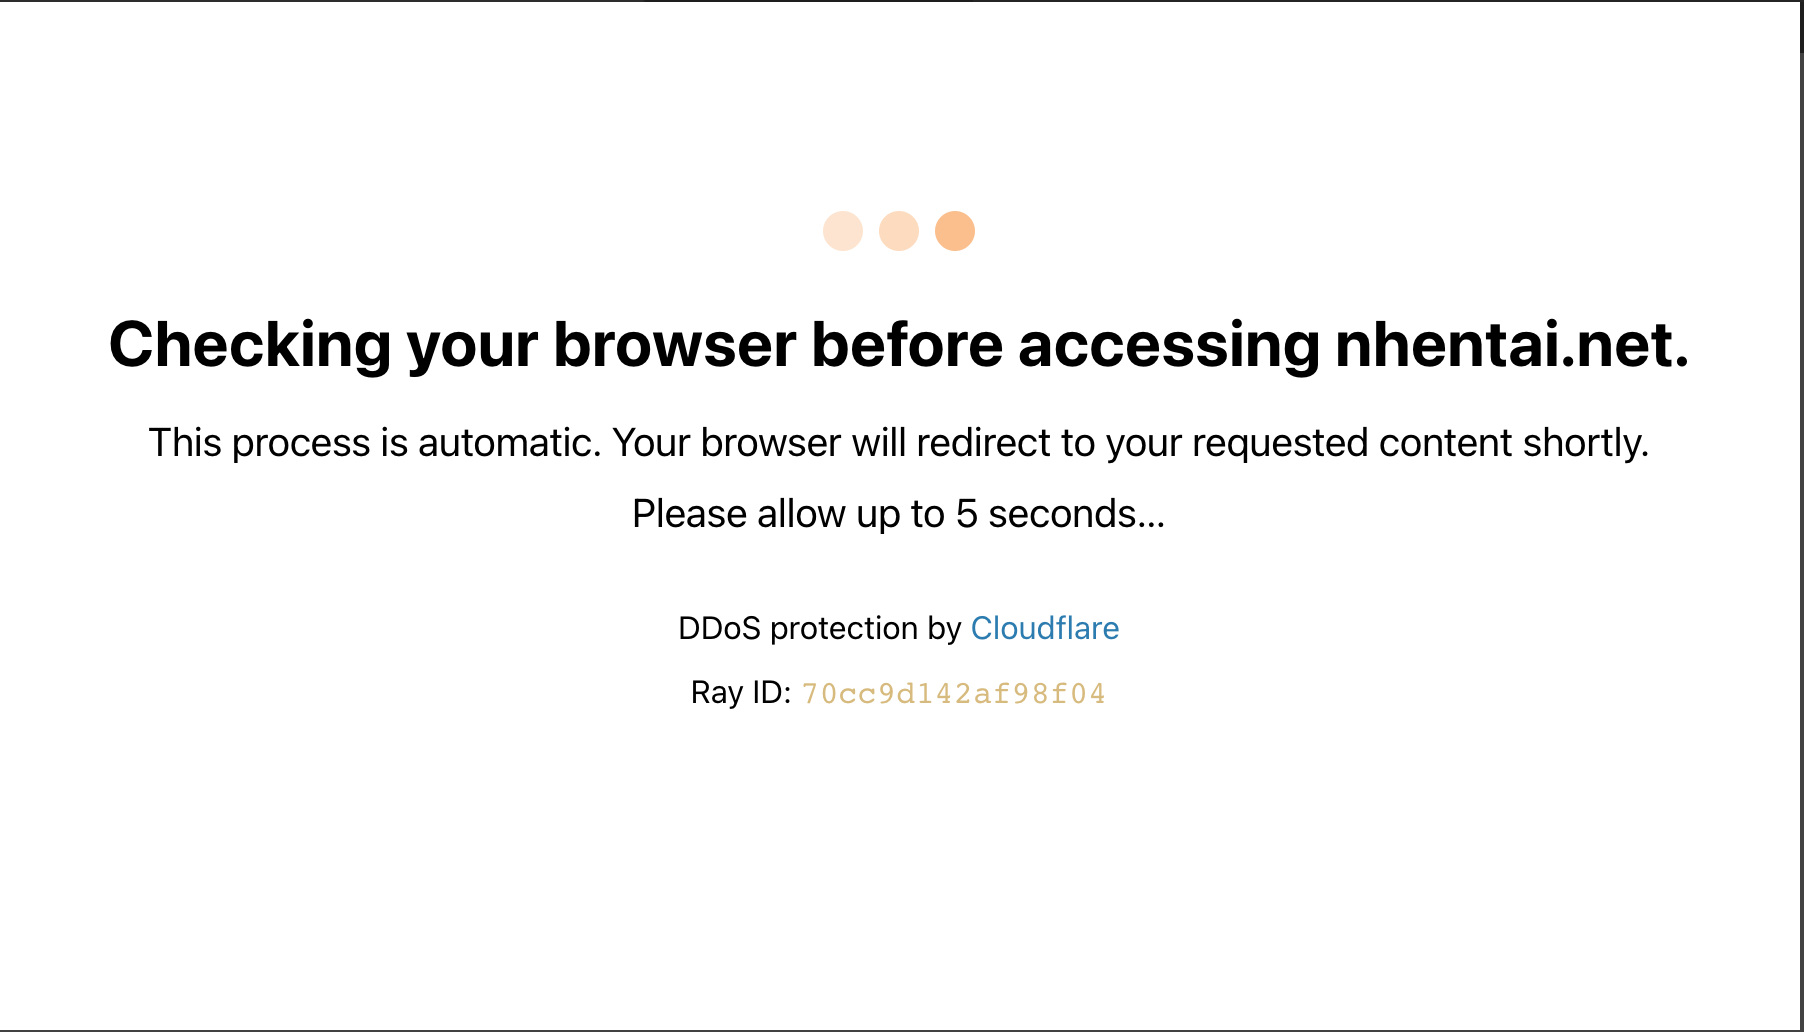 Cloudflare ddos protection 5 seconds hints